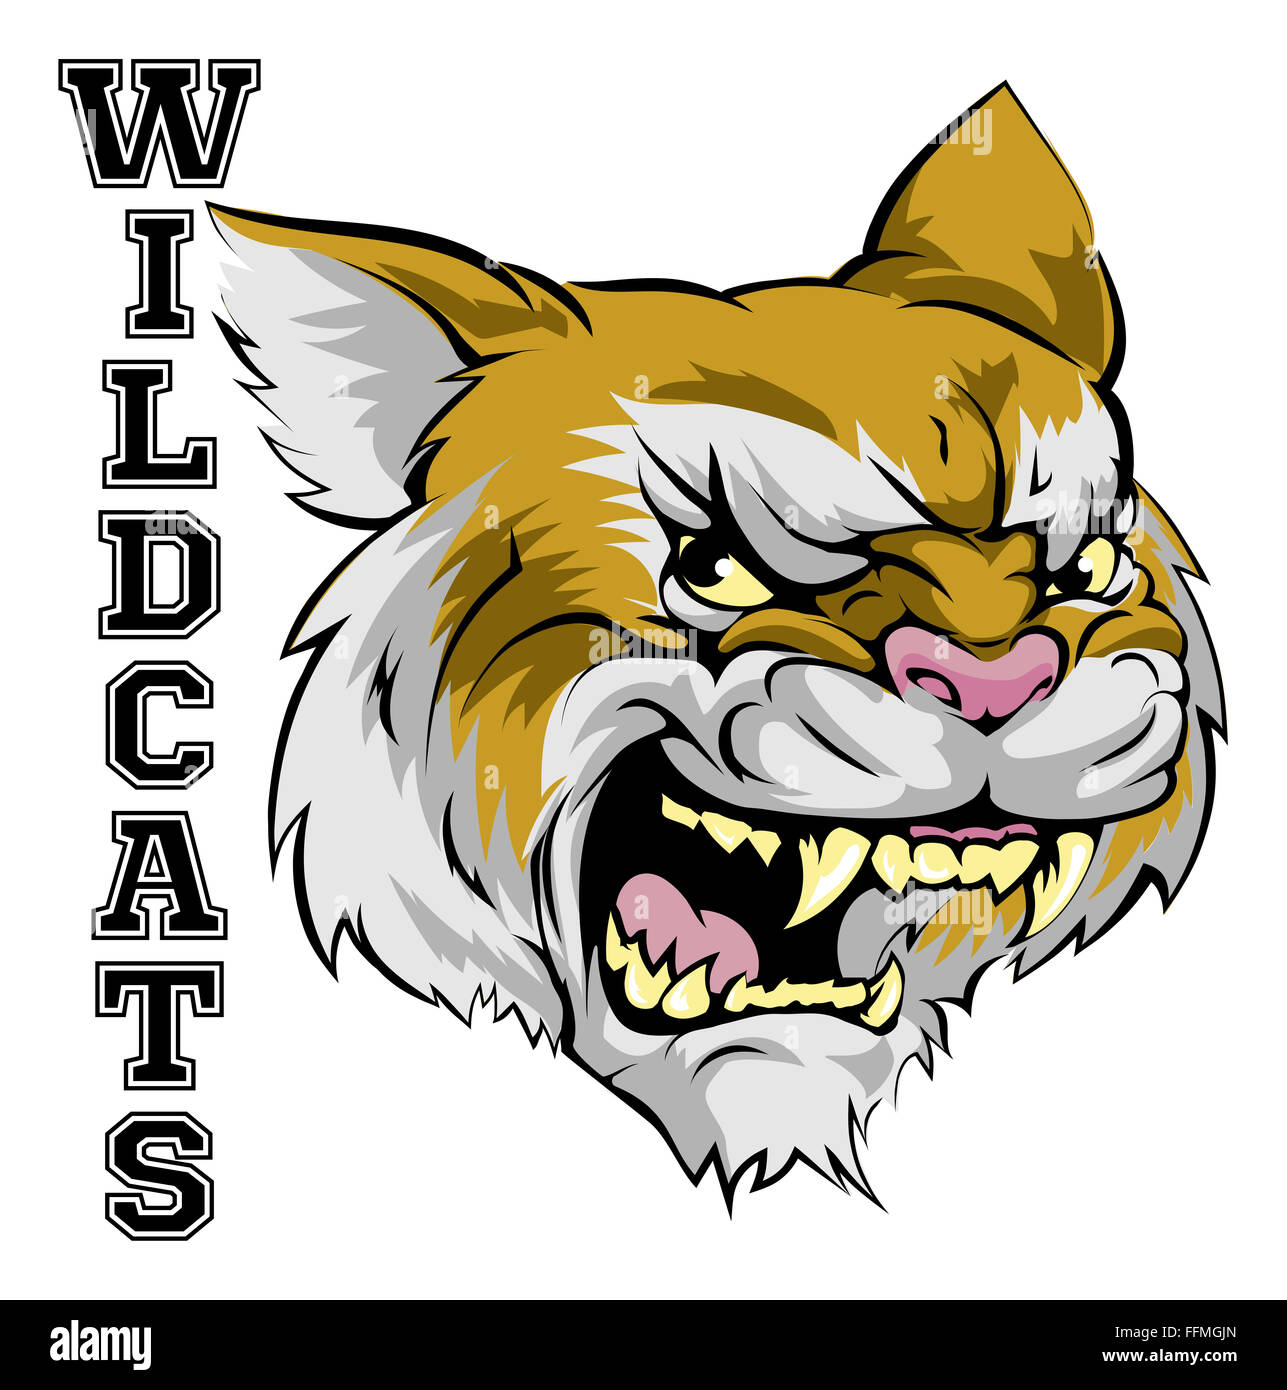 An illustration of a cartoon wildcat sports team mascot with the text